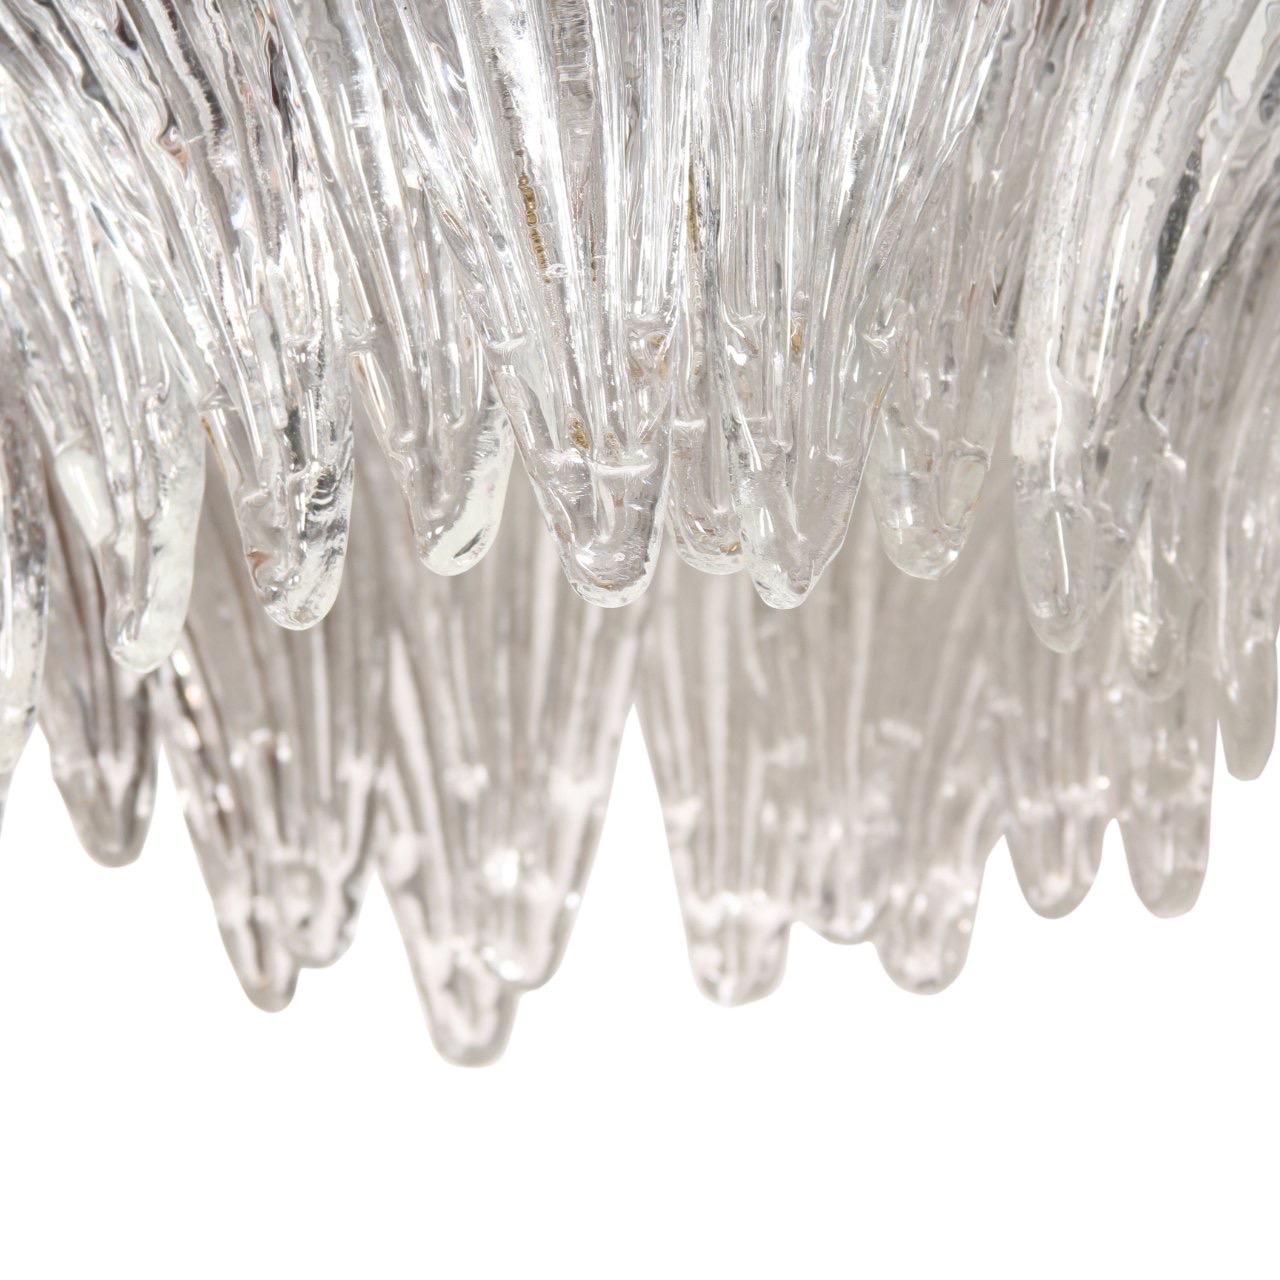 A large Barovier and Toso flush mount light fixture featuring one round tier of overlapping large, curved hand-blown frosted palm leaves in the Graniglia technique.

Signed with Barovier & Toso silver label.

Italy, circa 1970-1980.

Wired for USA;